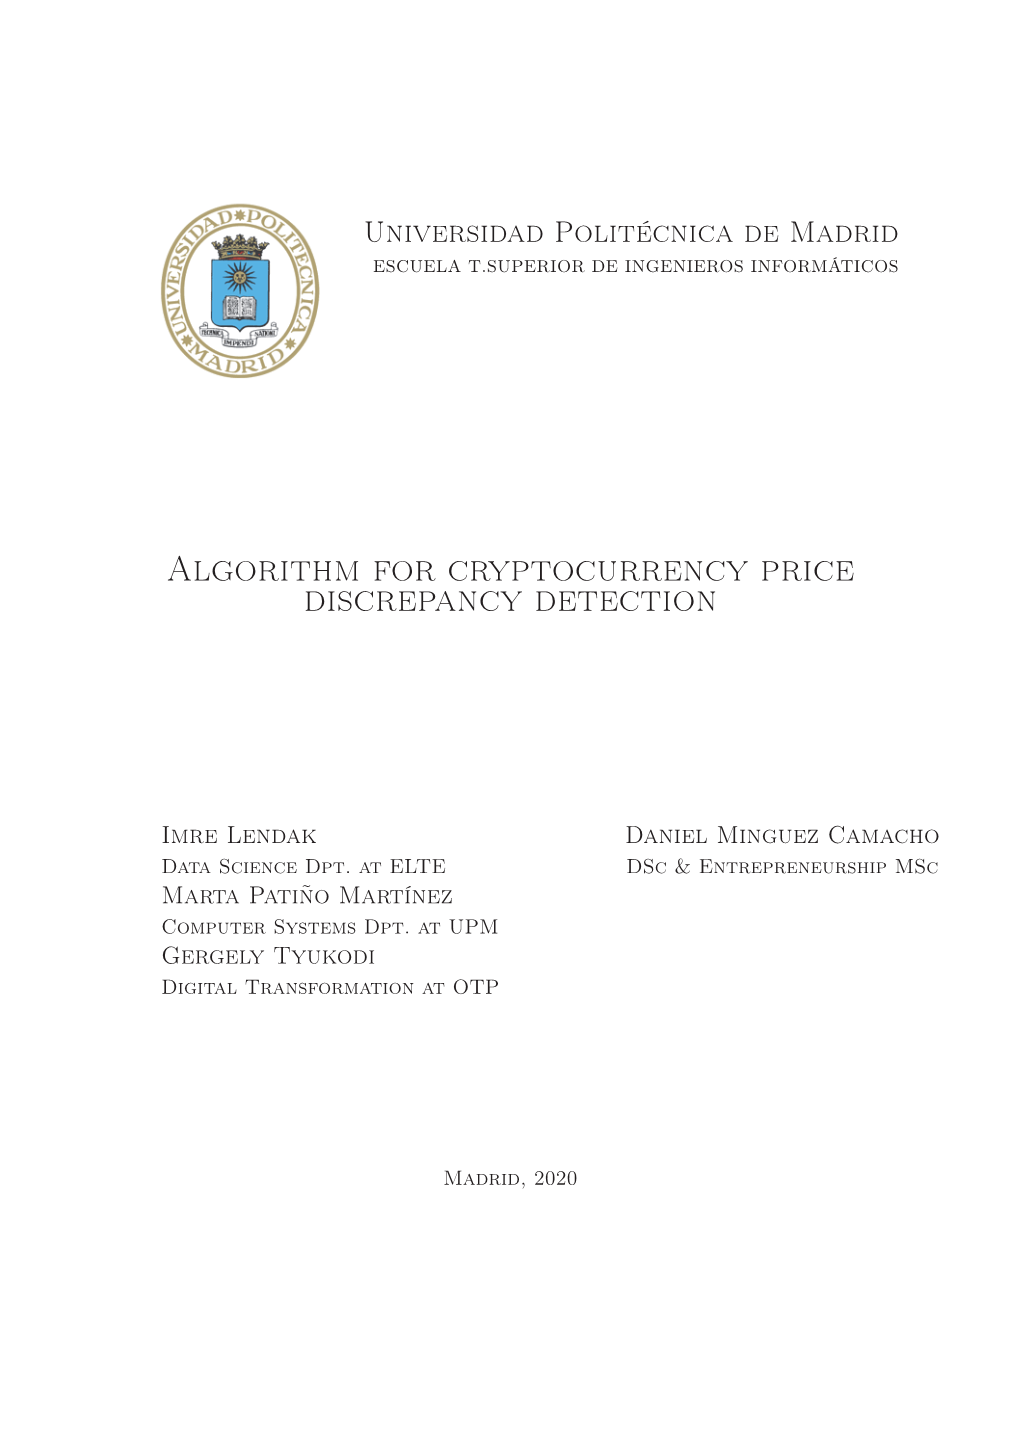 Algorithm for Cryptocurrency Price Discrepancy Detection